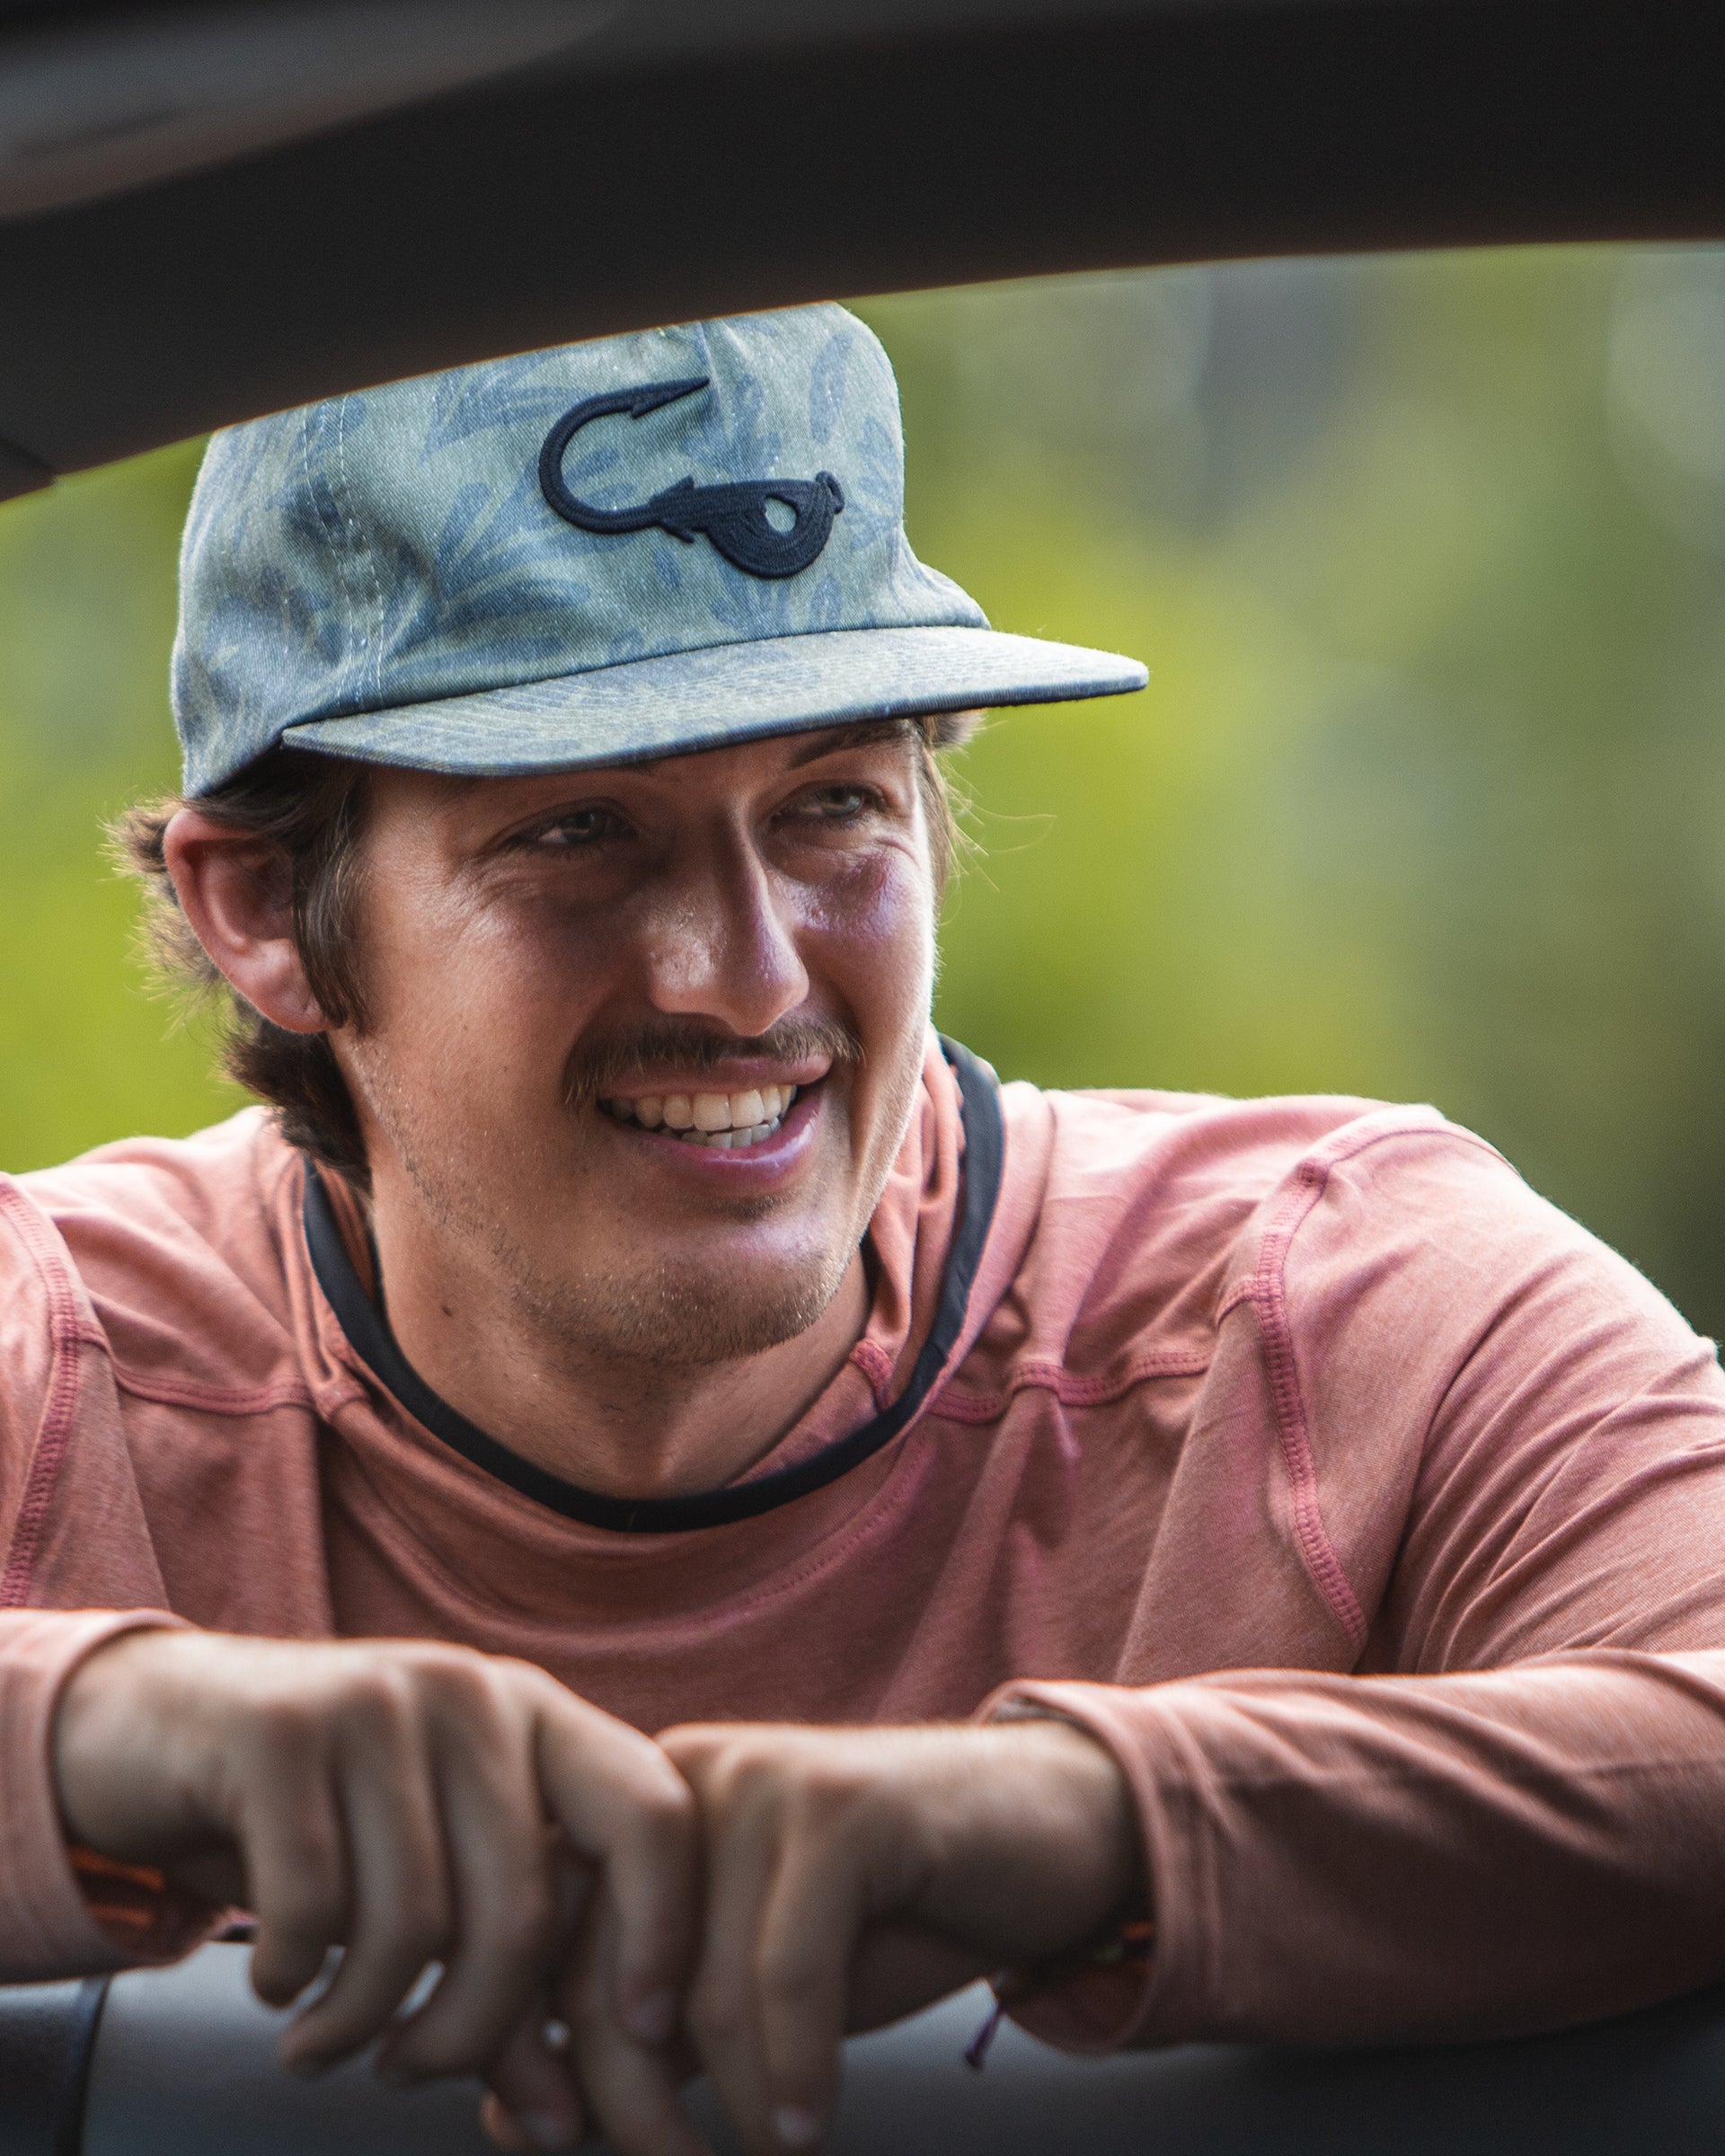 Model wearing the Jigalode "Mighty Jig" 5-Panel hat while leaning through a car window. The hat is an unstructured flat brim fishing hat that features an all over printed tropical plant pattern. The front of the hat has the Jigalode "Mighty Jig" logo. 